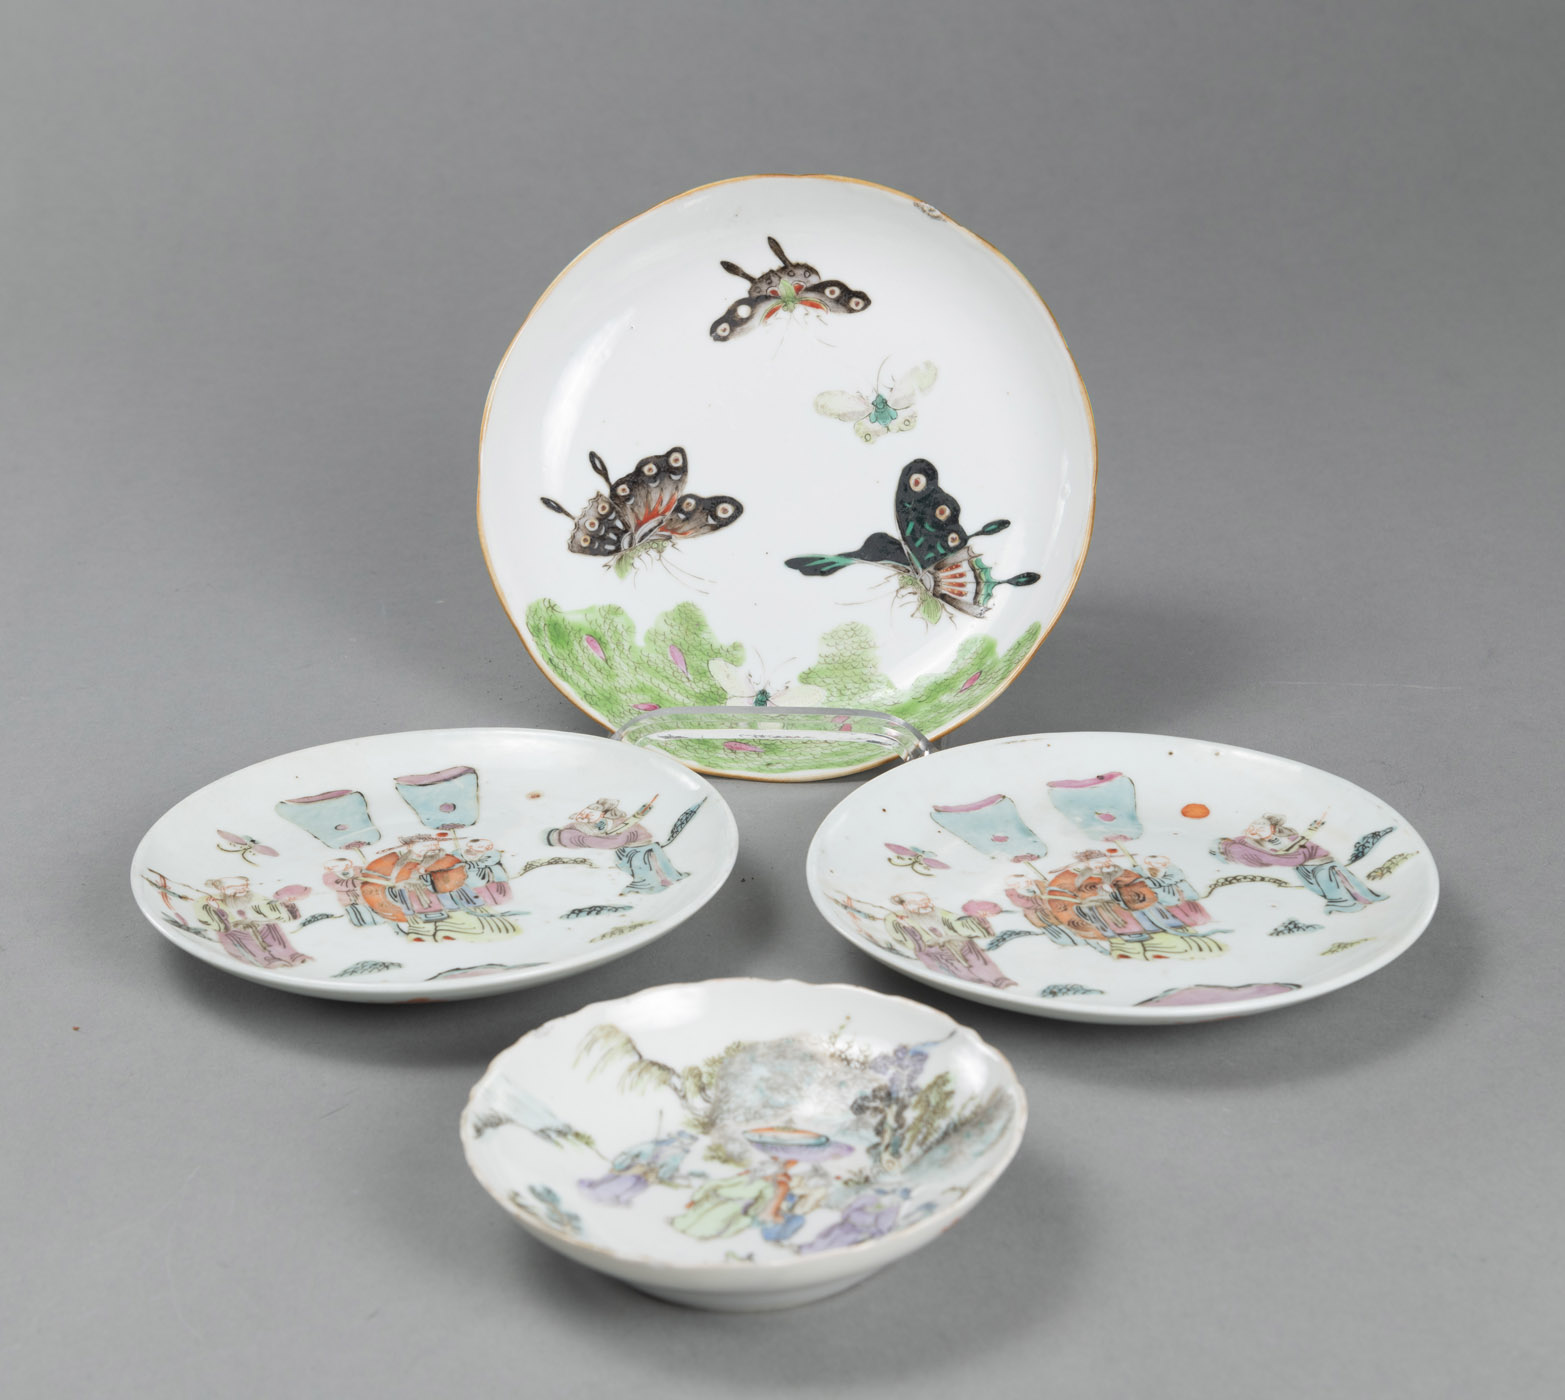 <b>THREE 'FAMILLE ROSE' PORCELAIN DISHES AND A SAUCER</b>